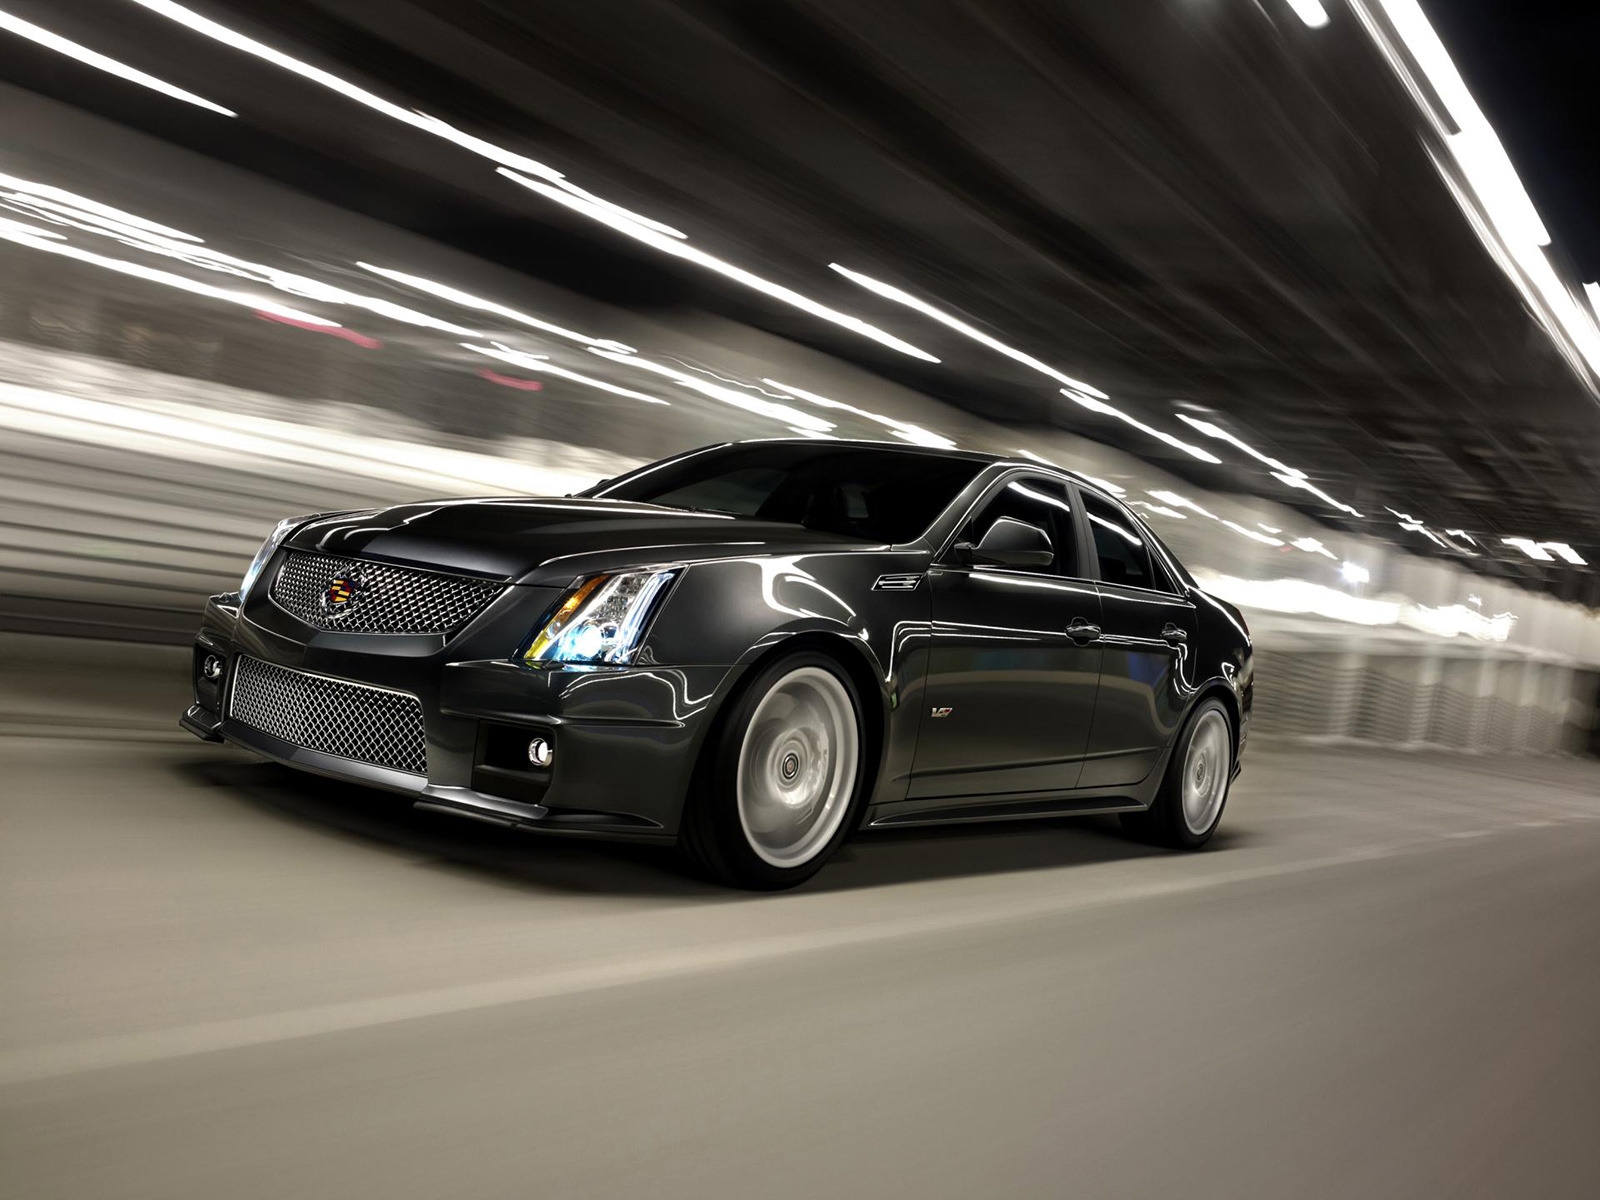 Cadillac CTS 2013 for 1600 x 1200 resolution